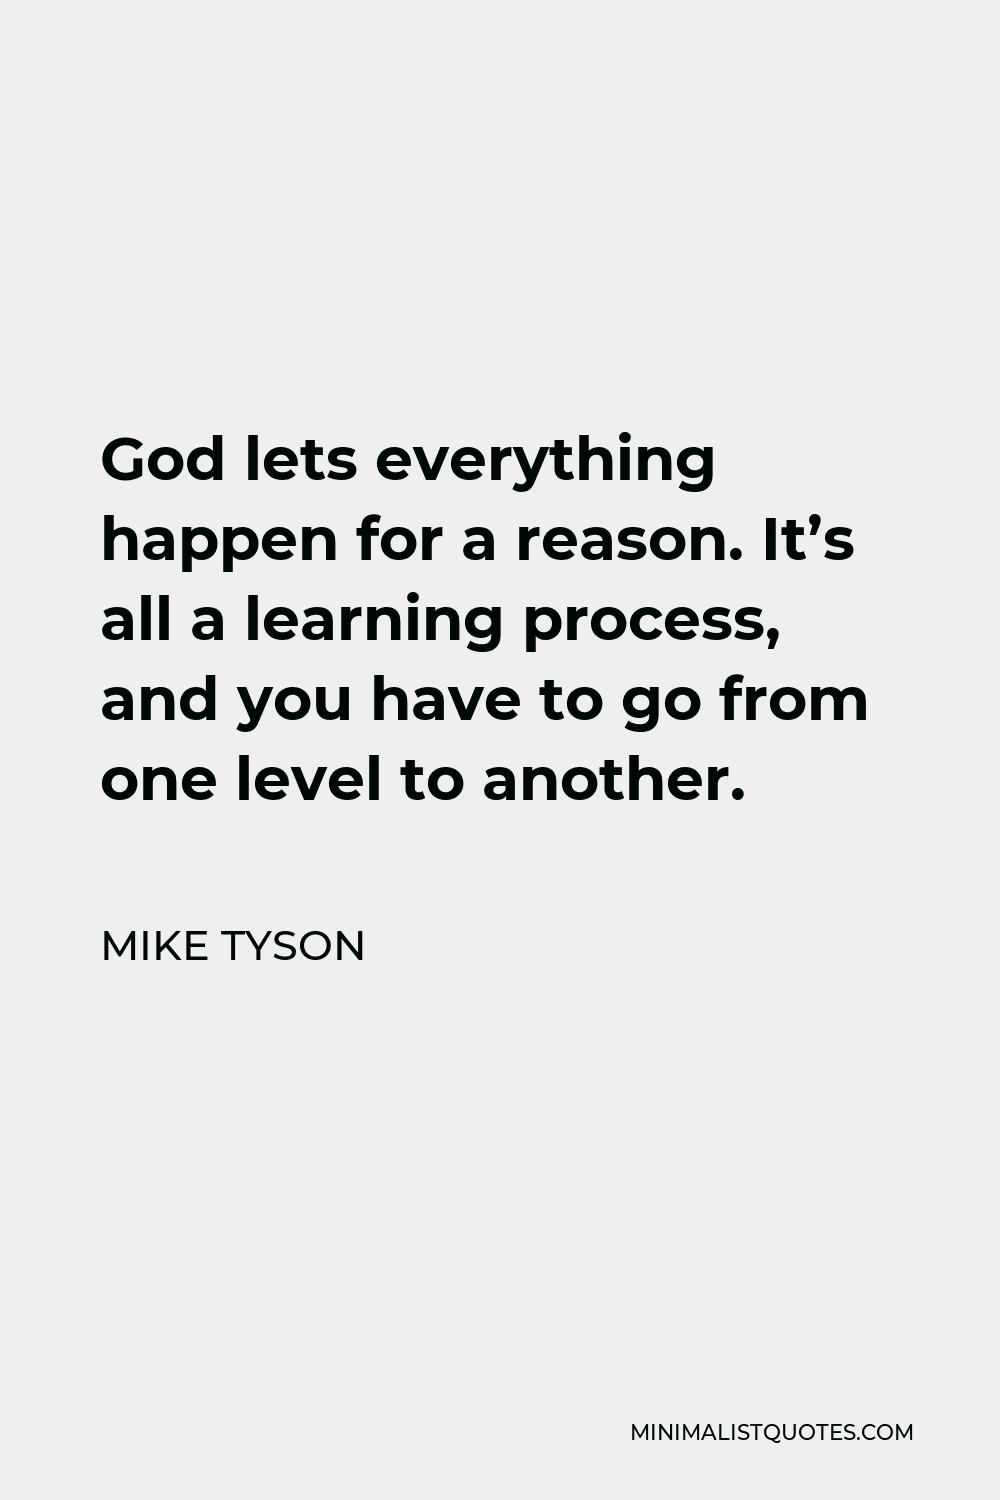 Mike Tyson Quote - God lets everything happen for a reason. It’s all a learning process, and you have to go from one level to another.